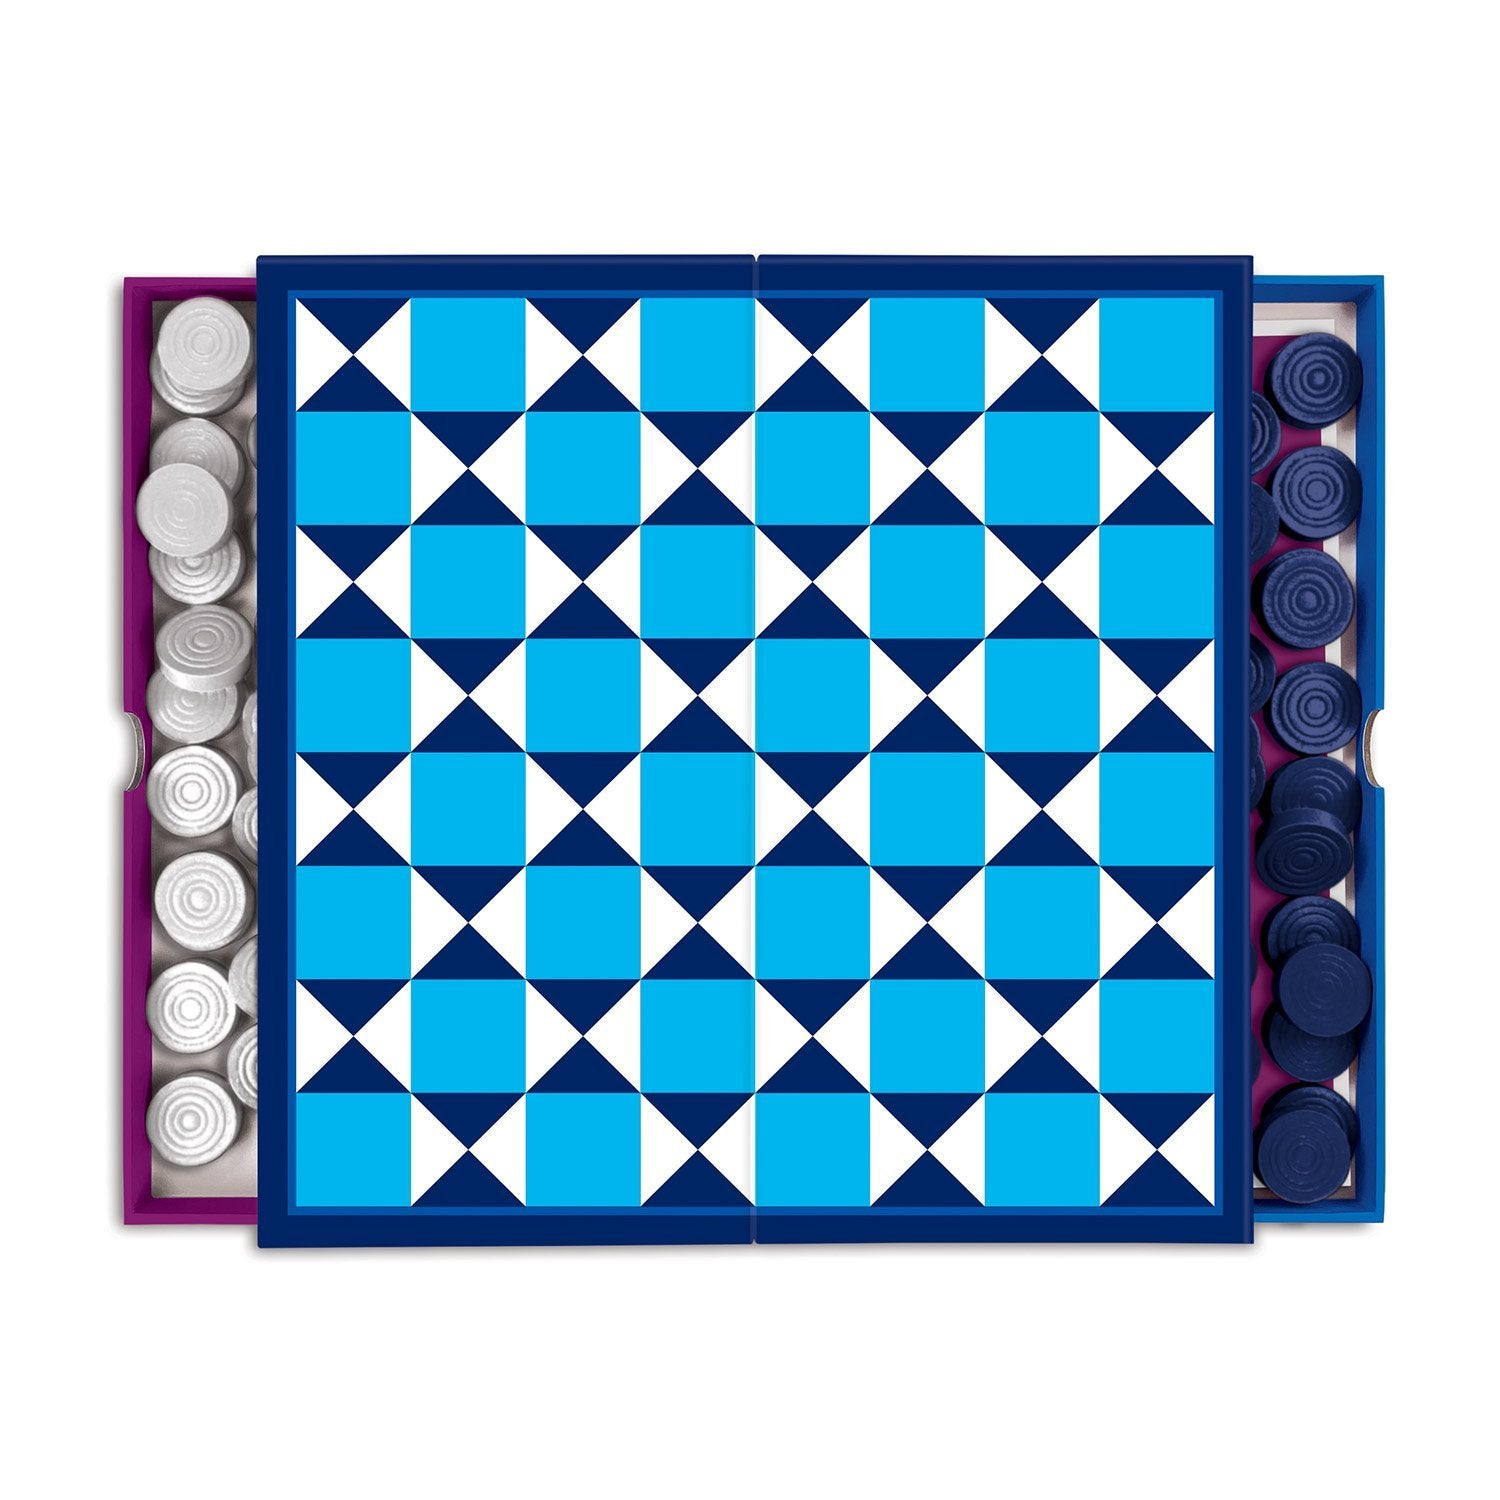 Backgammon and Checkers 2-in-1 set by Jonathan Adler